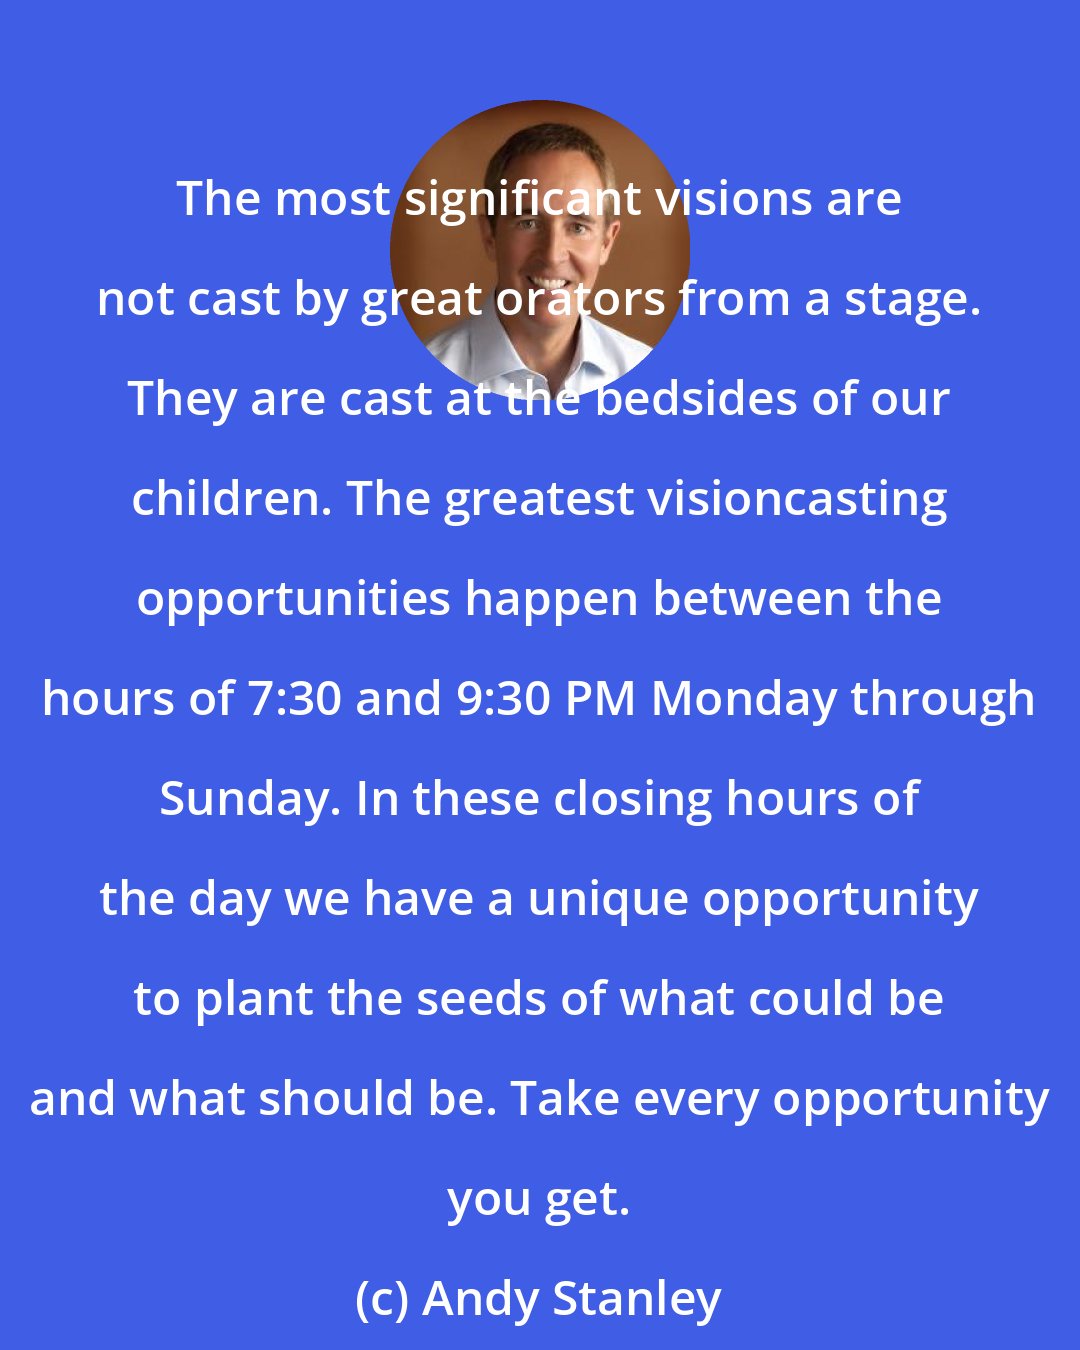 Andy Stanley: The most significant visions are not cast by great orators from a stage. They are cast at the bedsides of our children. The greatest visioncasting opportunities happen between the hours of 7:30 and 9:30 PM Monday through Sunday. In these closing hours of the day we have a unique opportunity to plant the seeds of what could be and what should be. Take every opportunity you get.